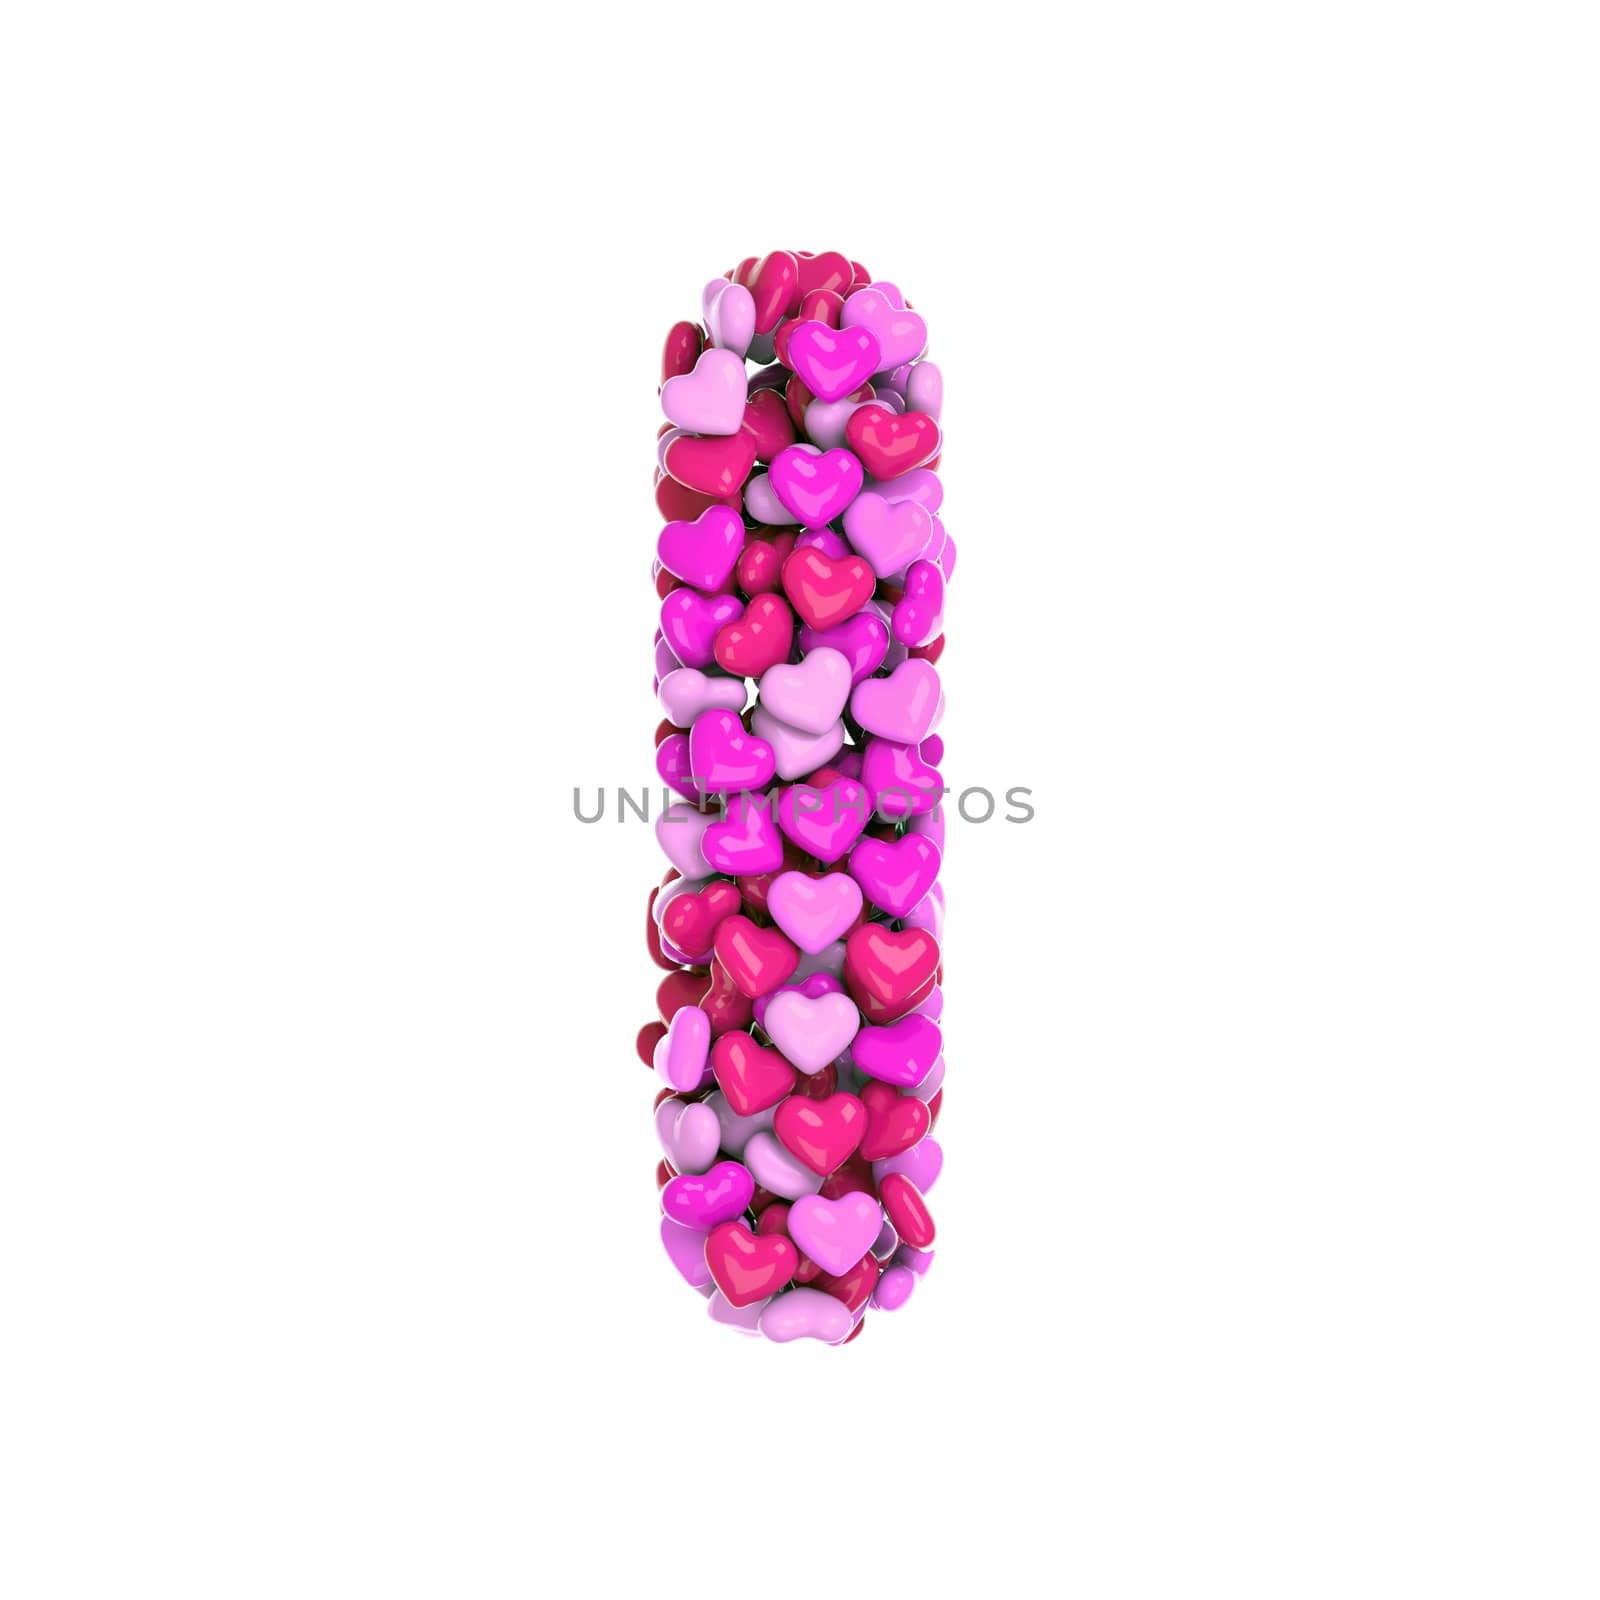 Valentine letter L - Small 3d pink hearts font - Love, passion or wedding concept by chrisroll